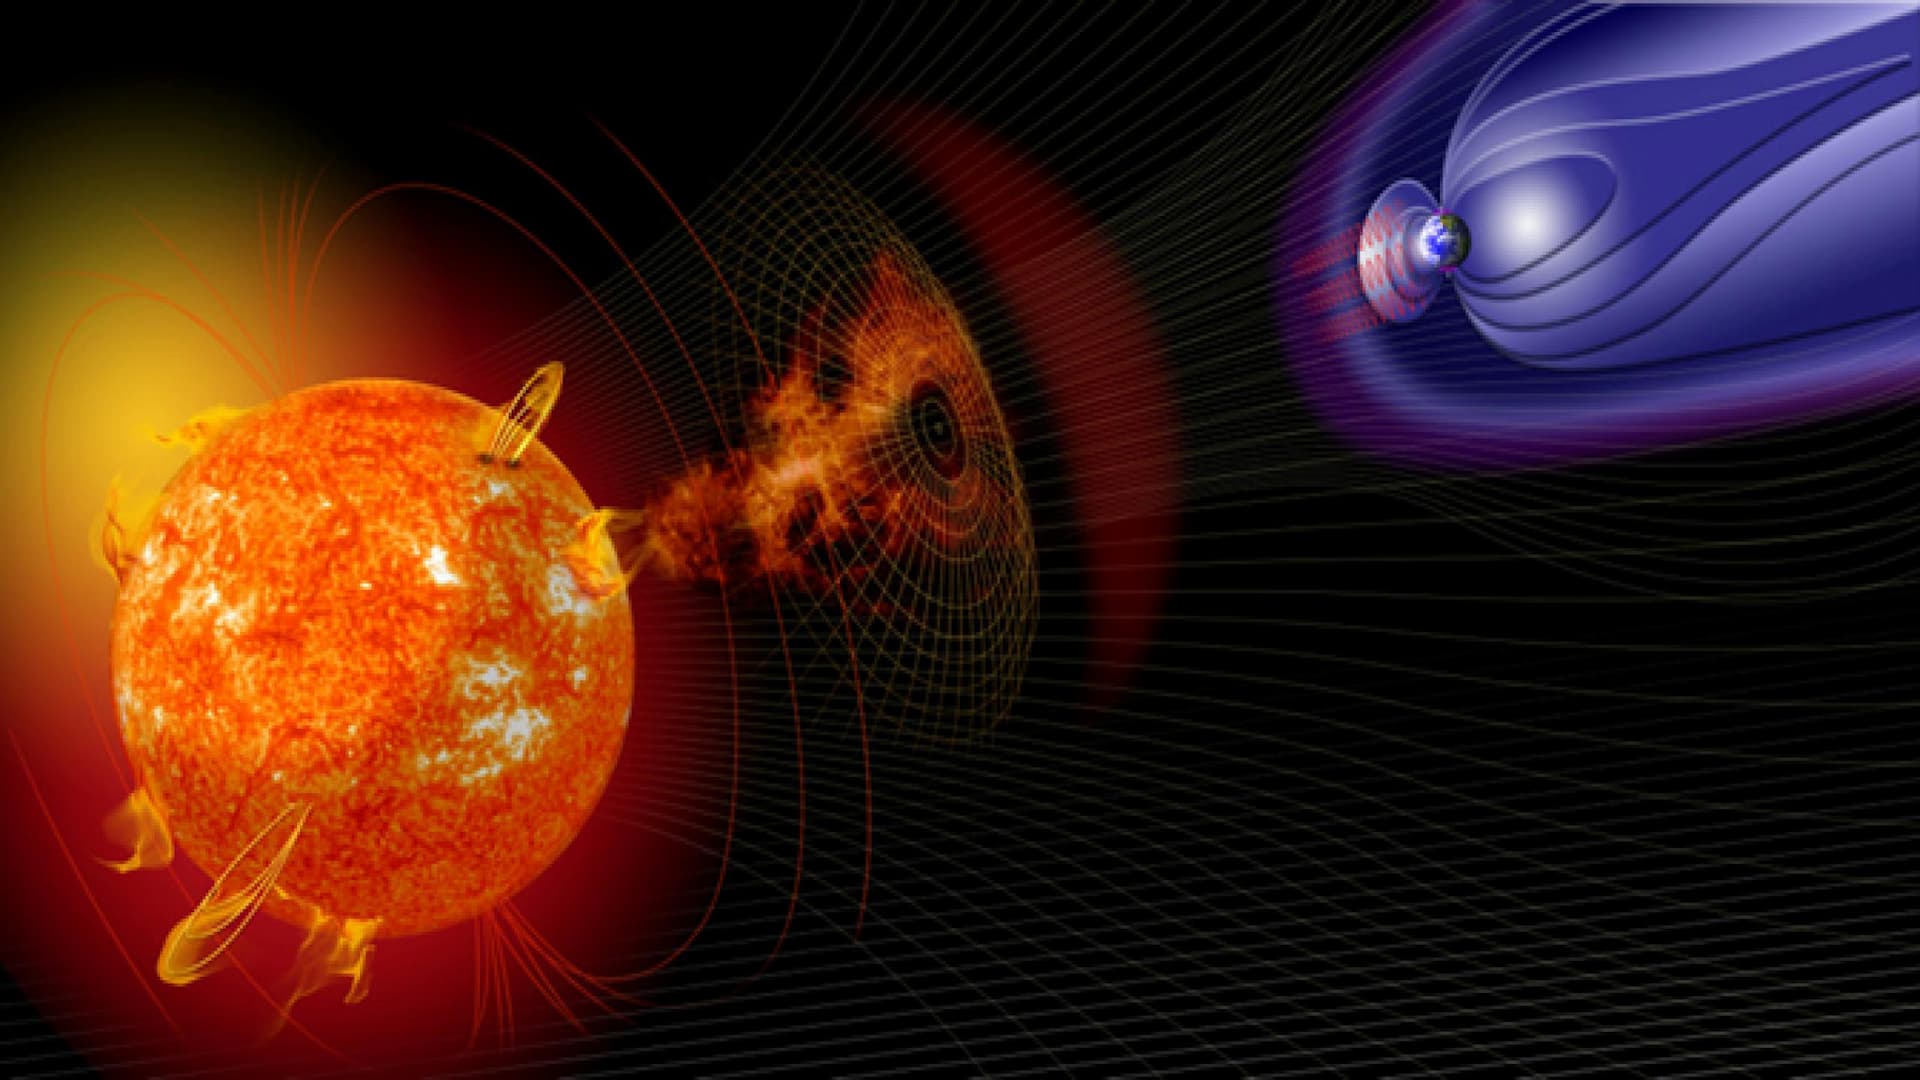 ASI - MoRe-ASI: “The Sun as a source of high-energy particles”